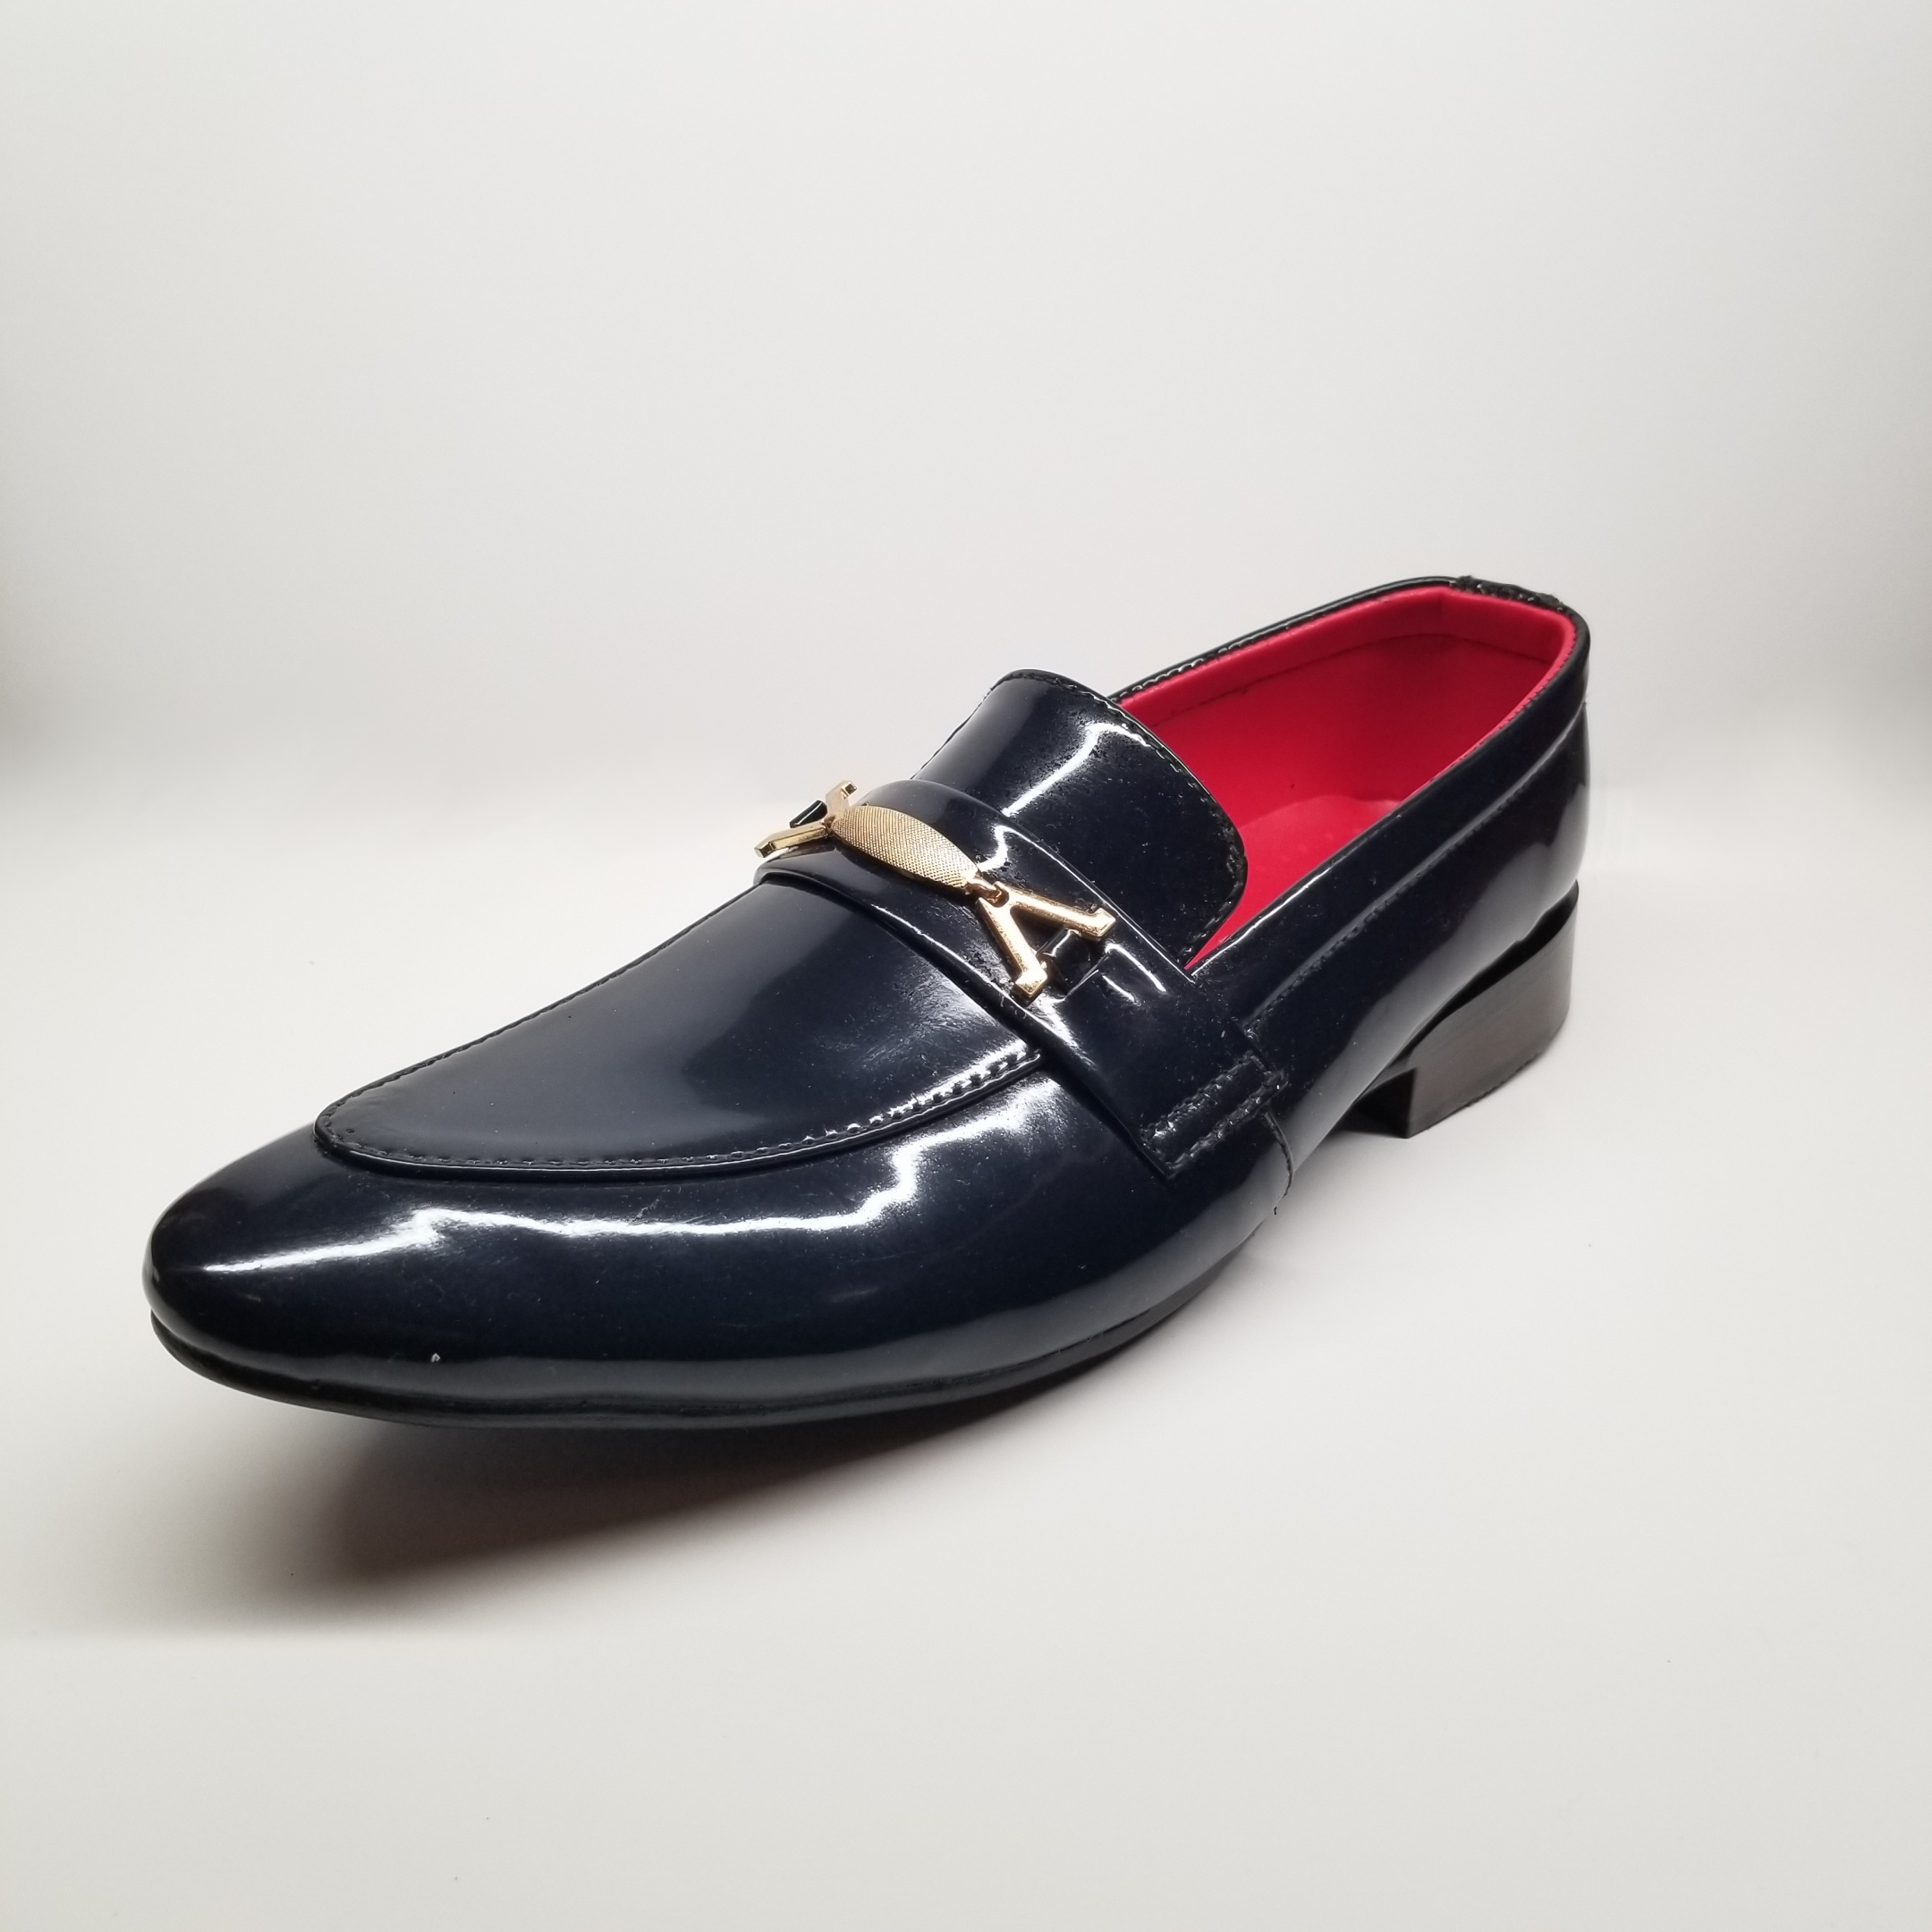 Moonshine Master dress shoes by Walkies at NMFootwear.com